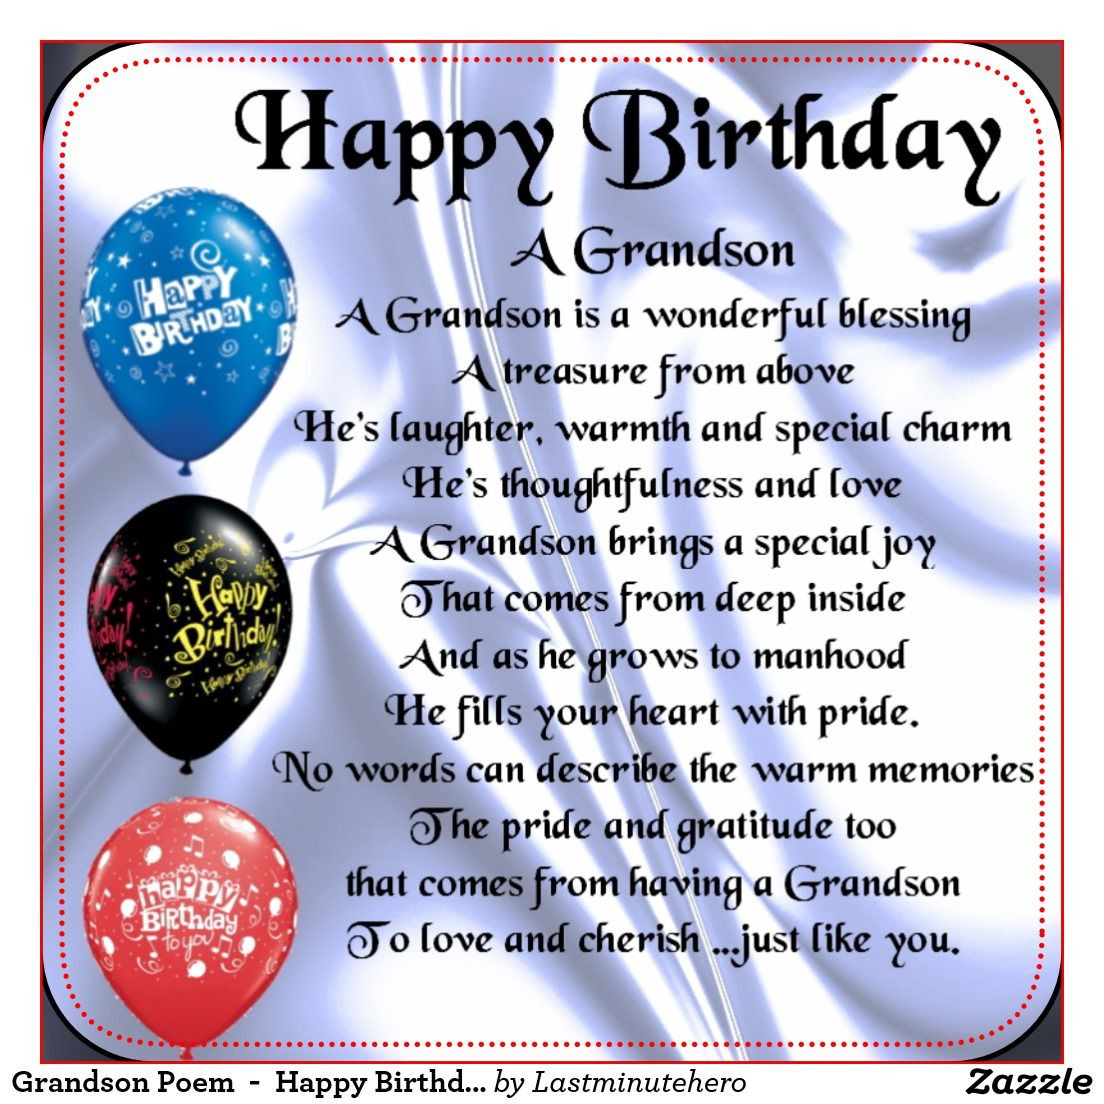 Happy Birthday Grandson Quotes
 Pin by mary mata on BIRTHDAY DAY CARDS